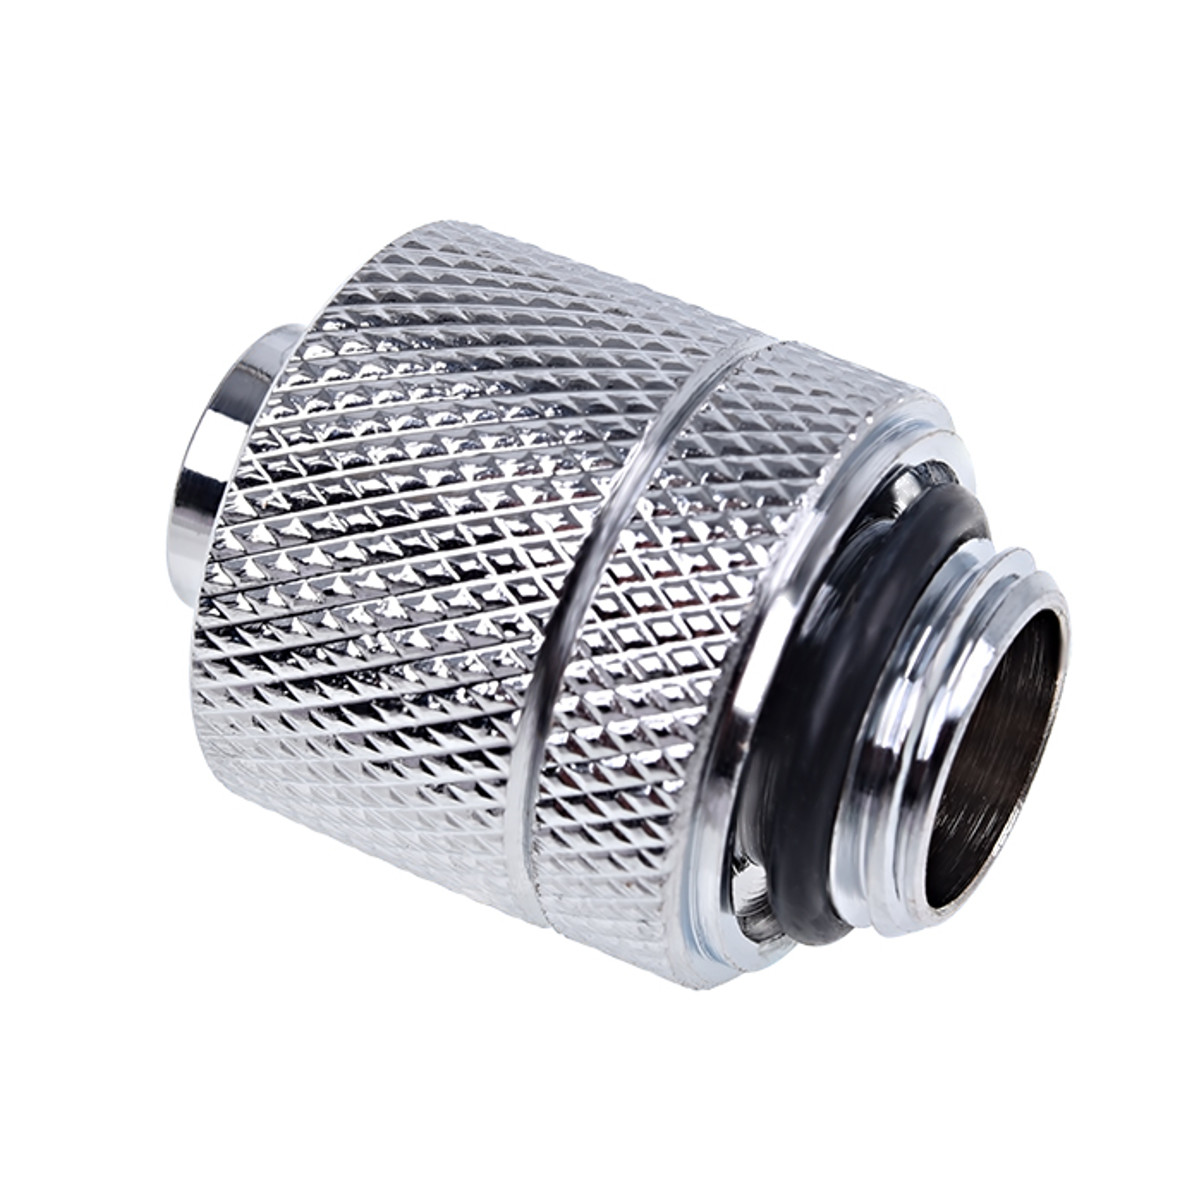 Alphacool - Alphacool Eiszapfen 13/10mm Chrome Compression Fitting - Six Pack